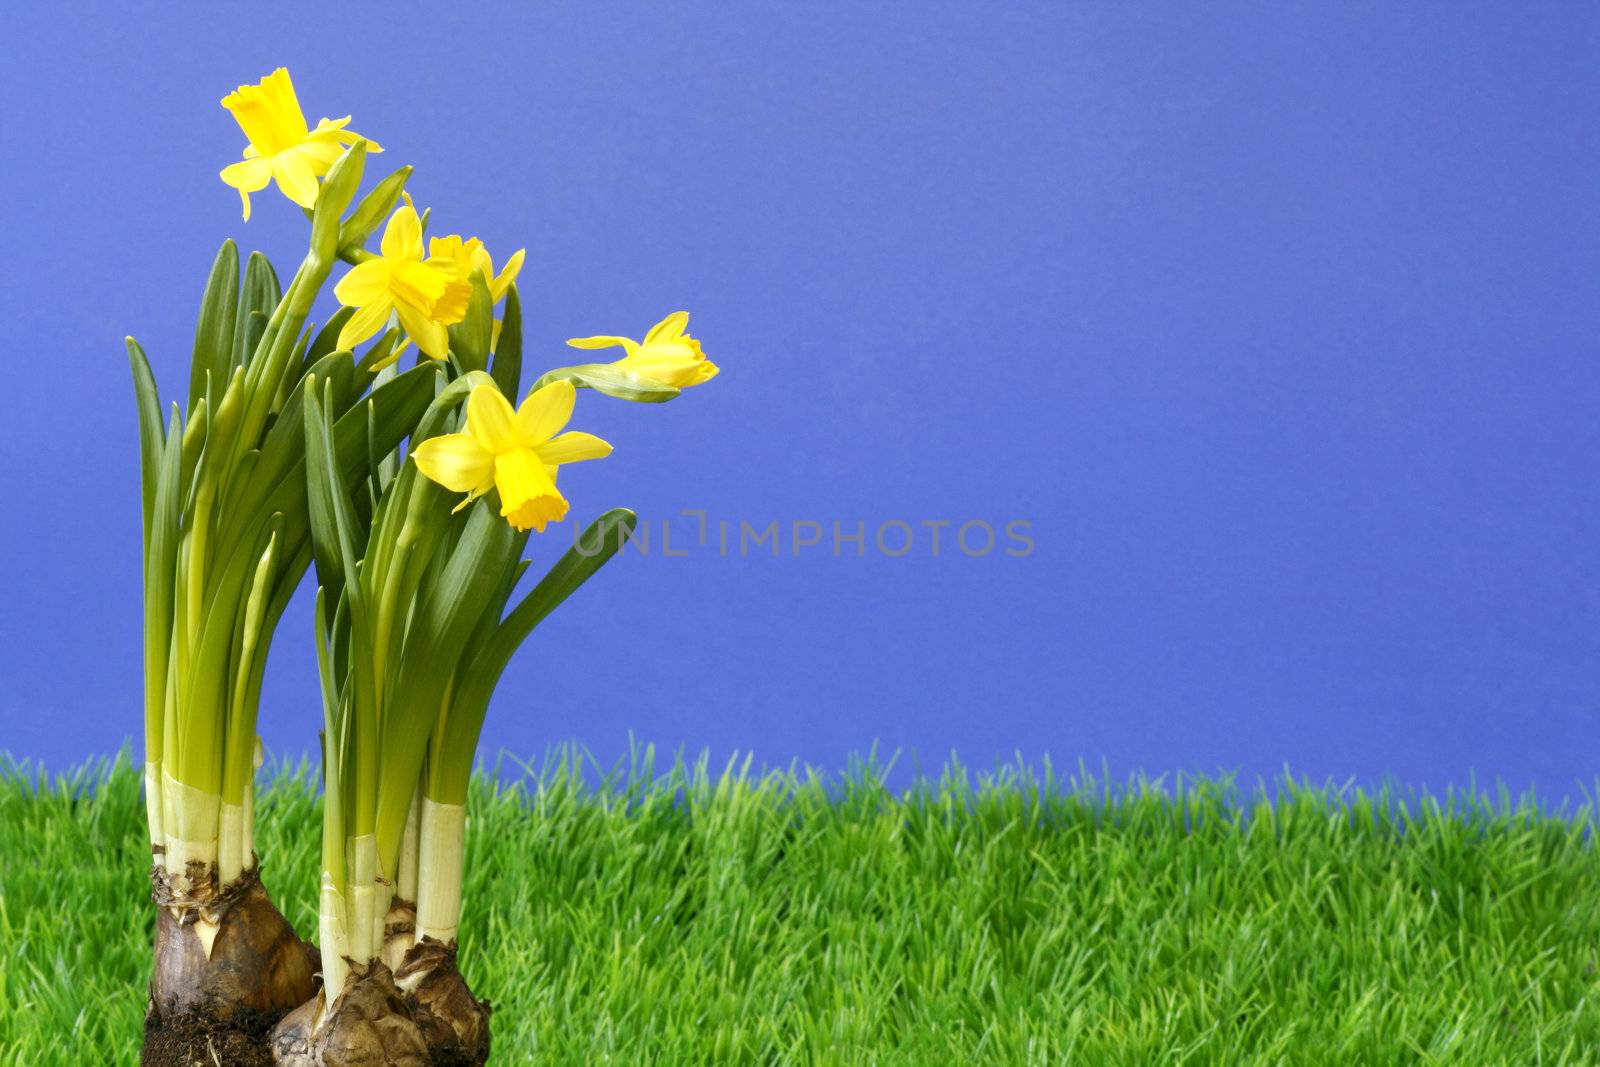 Close-up of daffodils on grass over blue background